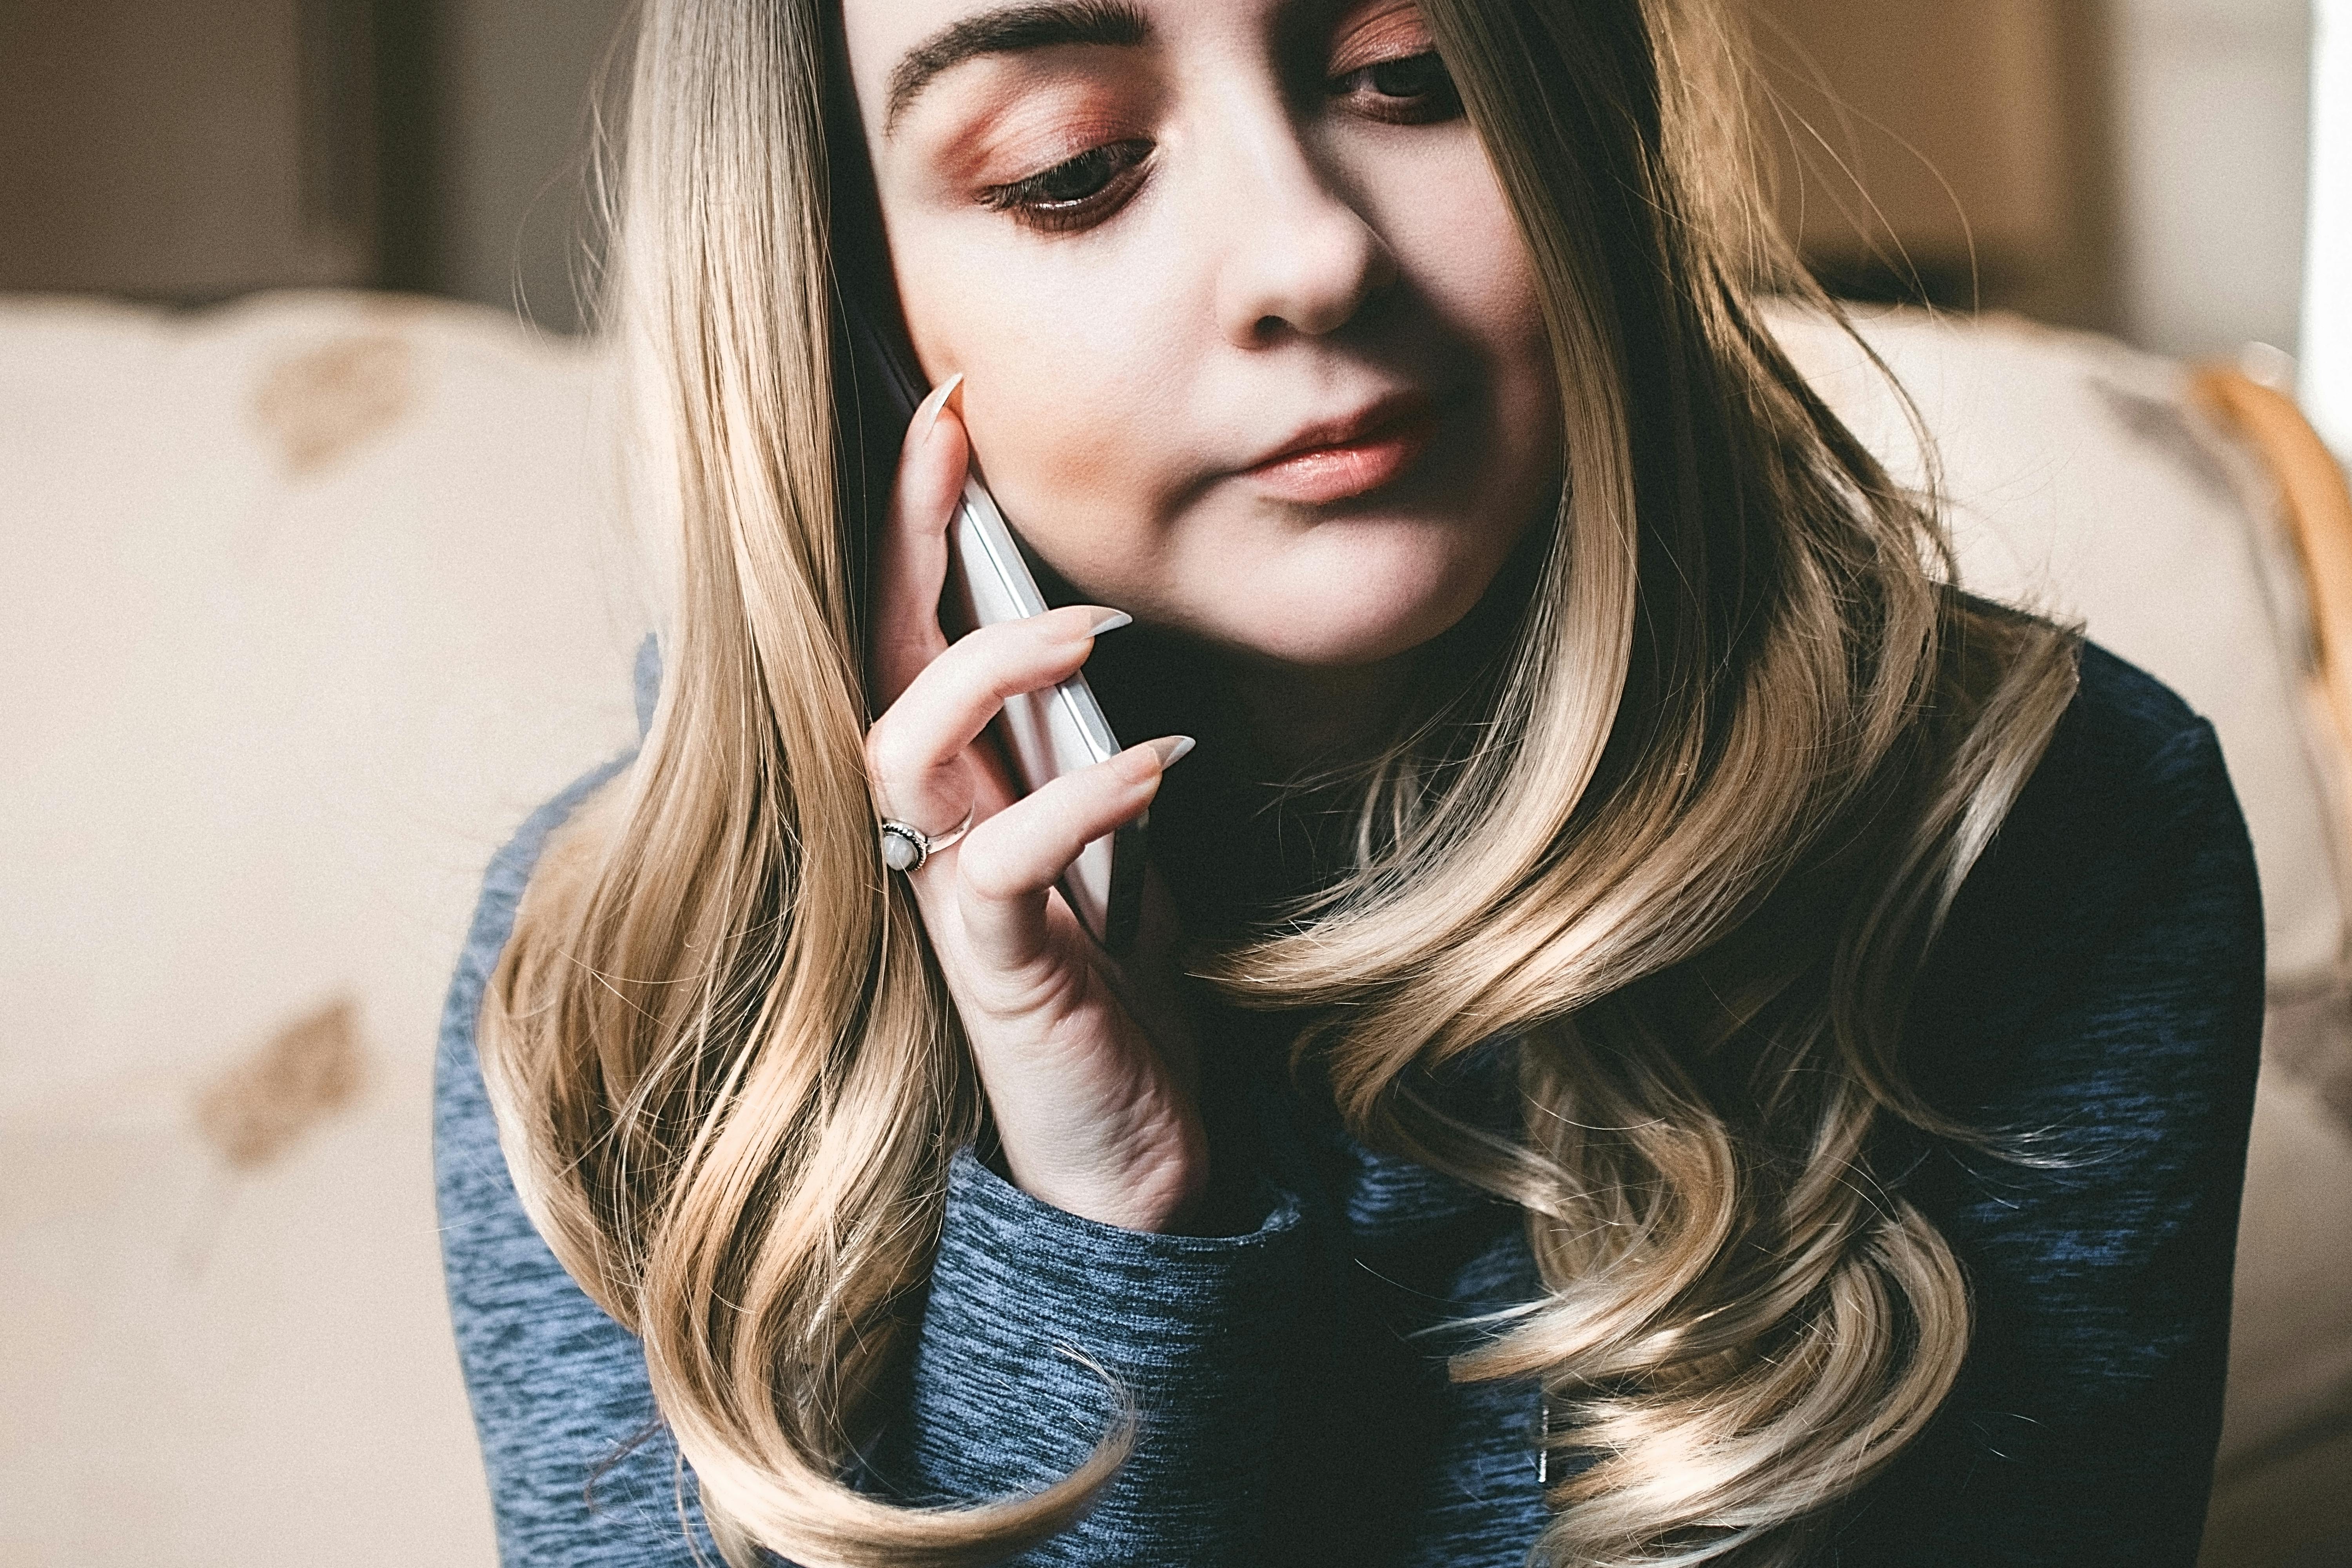 Woman explains something over phone | Source: Pexels